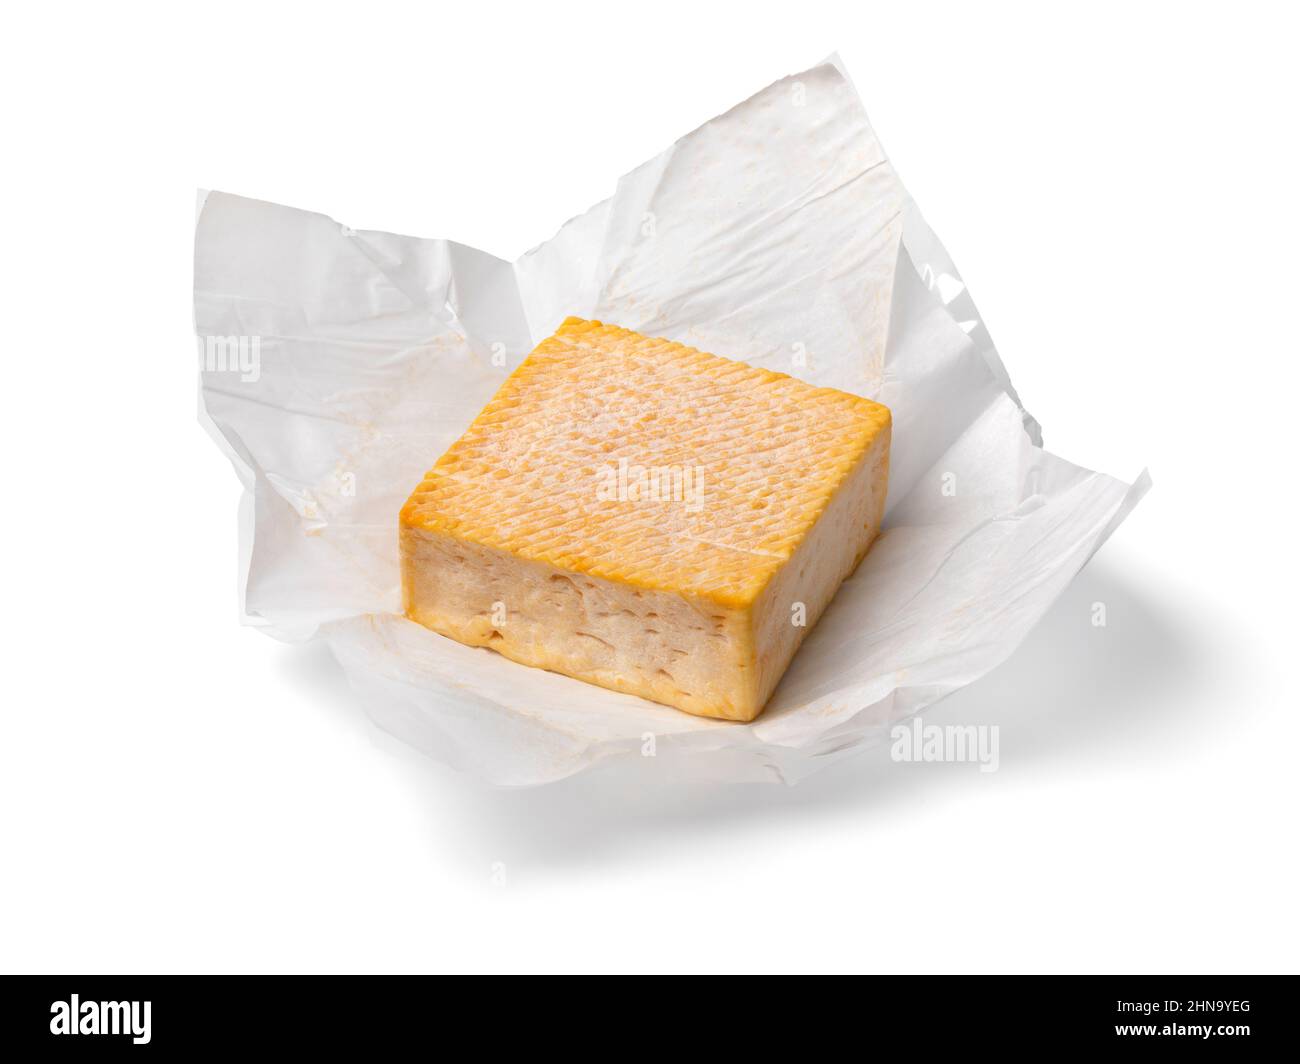 Single whole piece of Limburger or Herve cheese with a strong smell on package paper isolated on white background Stock Photo